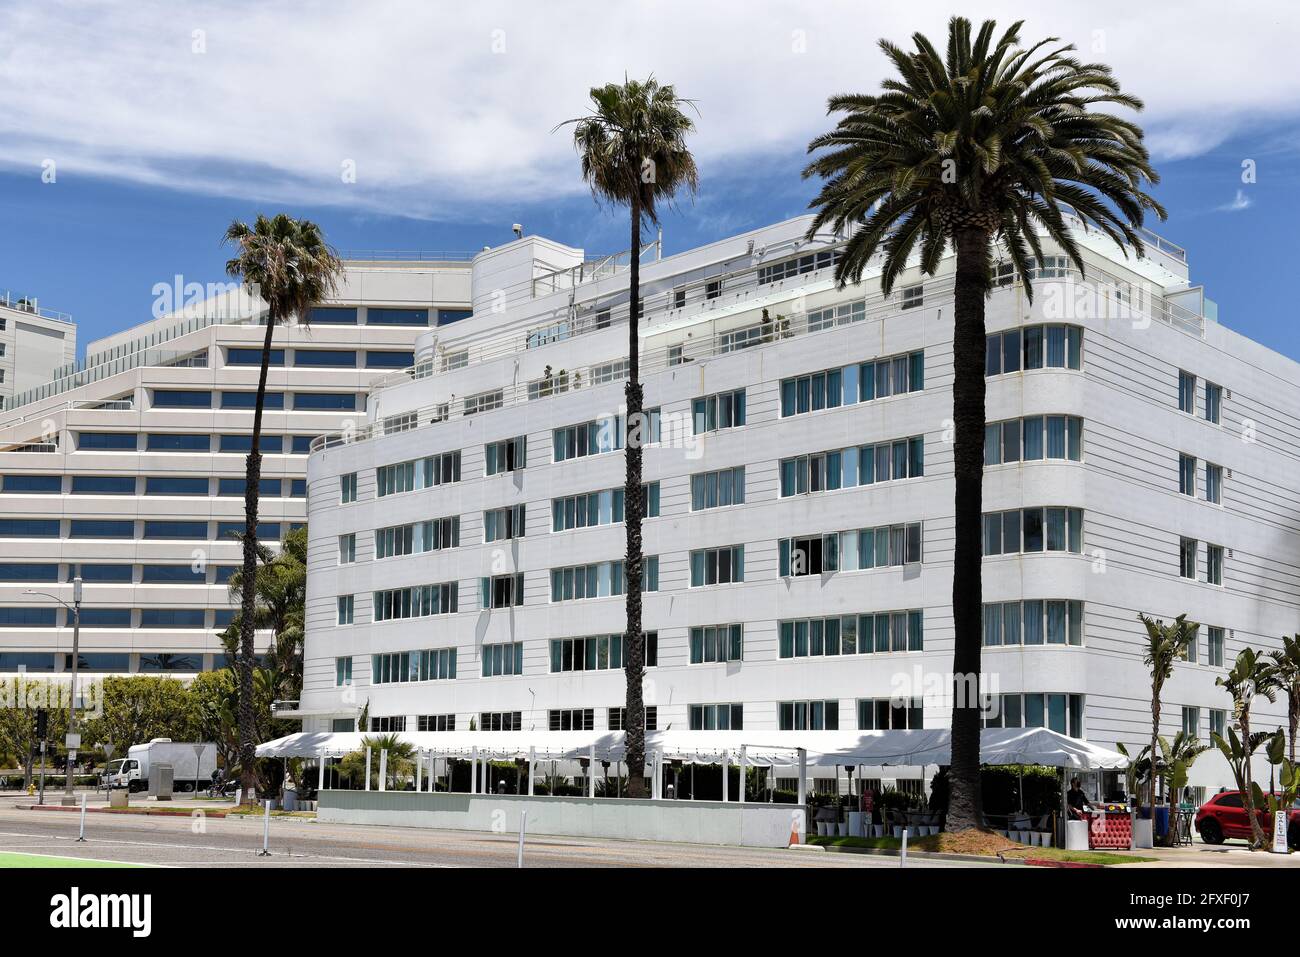 SANTA MONICA, CALIFORNIA - 25 MAY 2021: Hotel Shangri-La, an example of Streamline Moderne architecture and Art Deco design, on Ocean Avenue and Wilsh Stock Photo